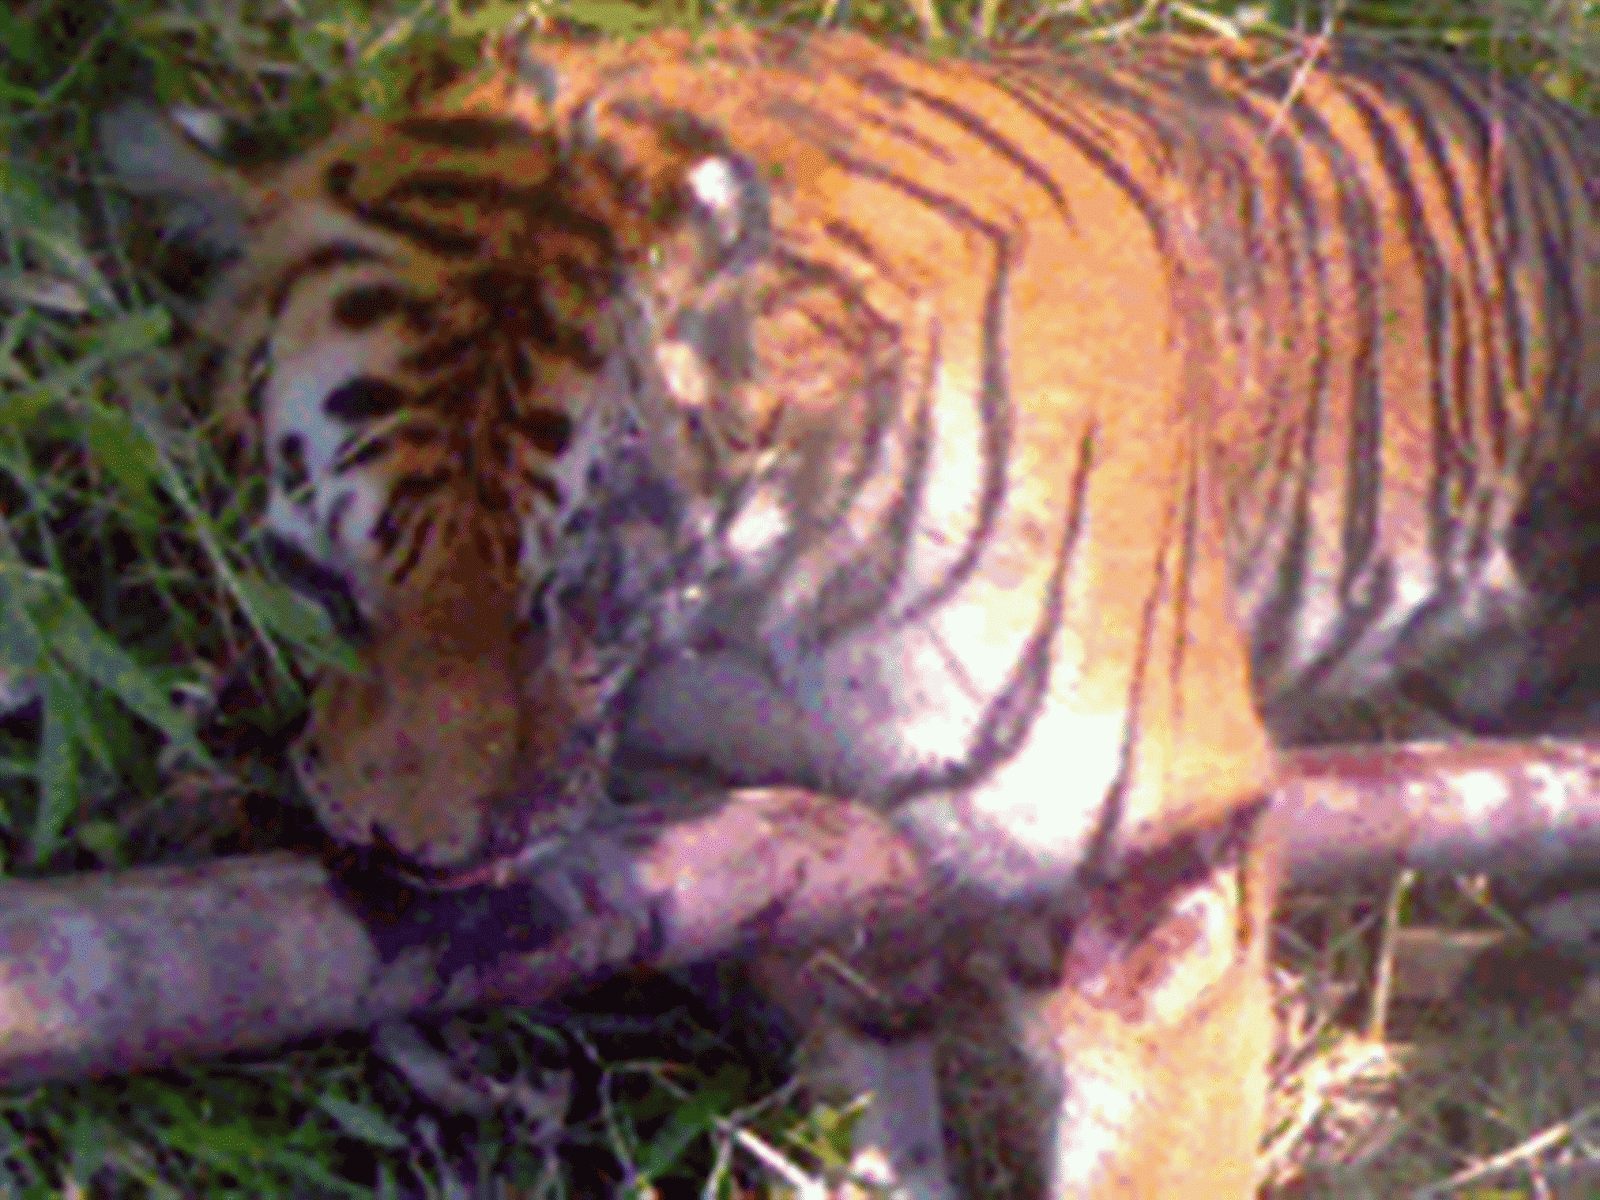 Sumatran tiger died by high electric fence in Berbak NP